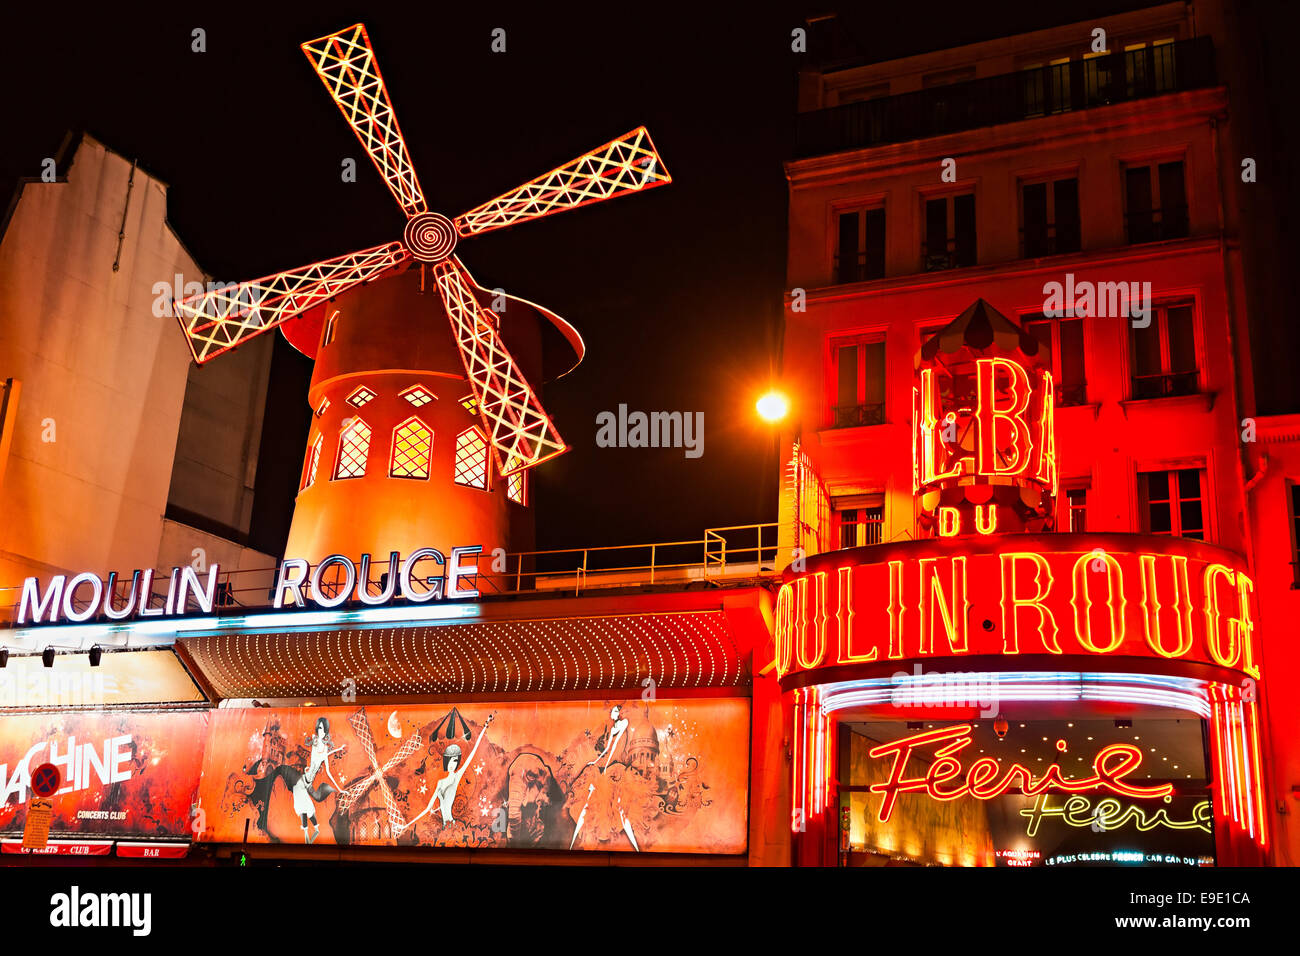 PARIS - DECEMBER 10: The Moulin Rouge by night, on December 10, 2012 in Paris, France. Moulin Rouge is a famous cabaret built in Stock Photo